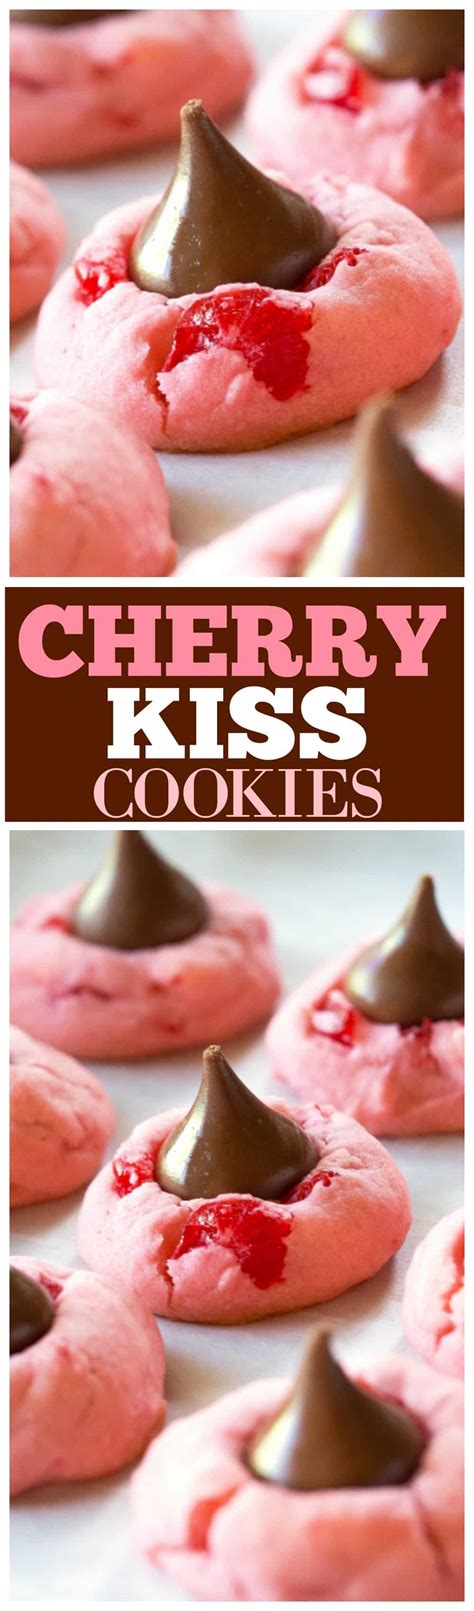 cherry-kiss-cookies-the-girl-who-ate-everything image